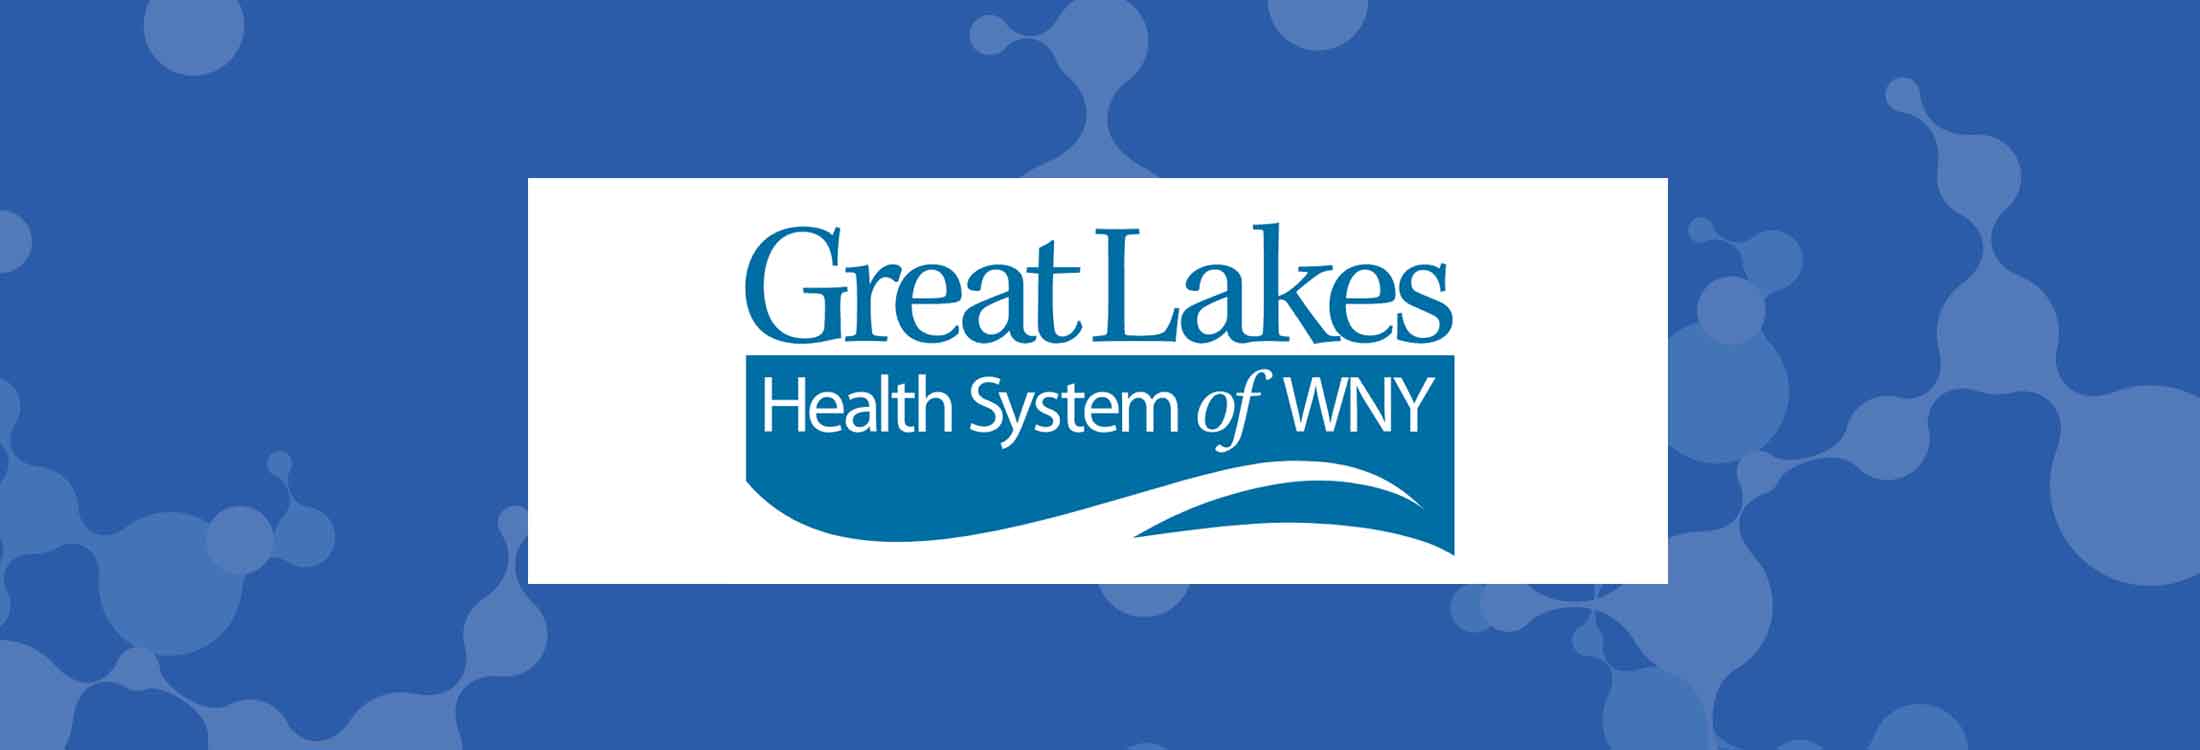 Great Lakes Health System of WNY